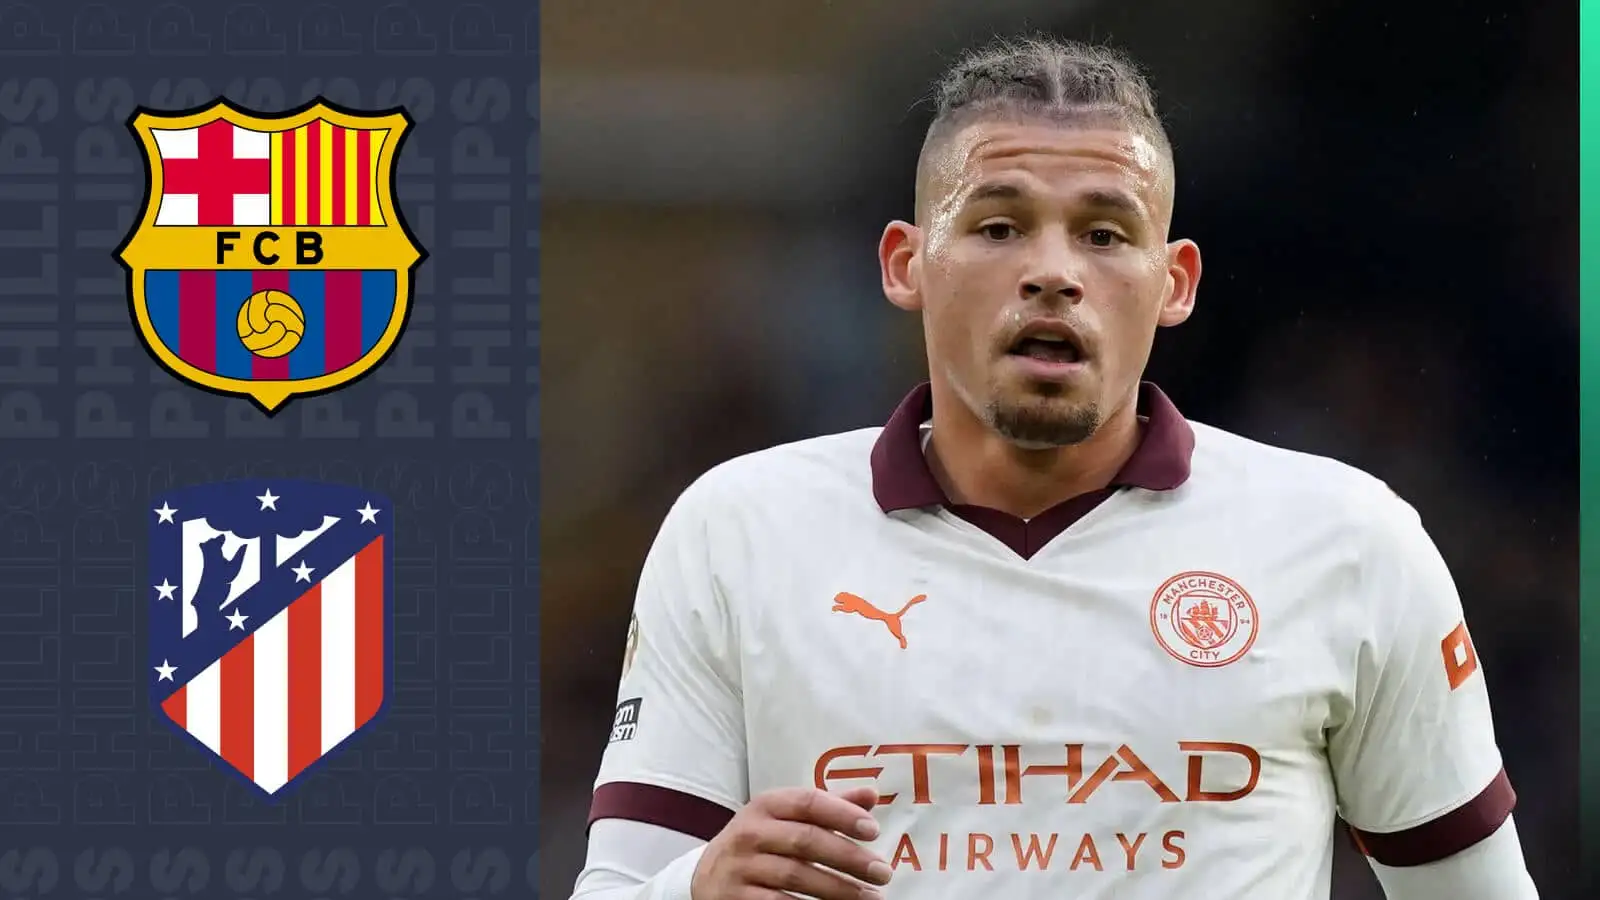 Kalvin Phillips next to the Barcelona and Atletico Madrid badges